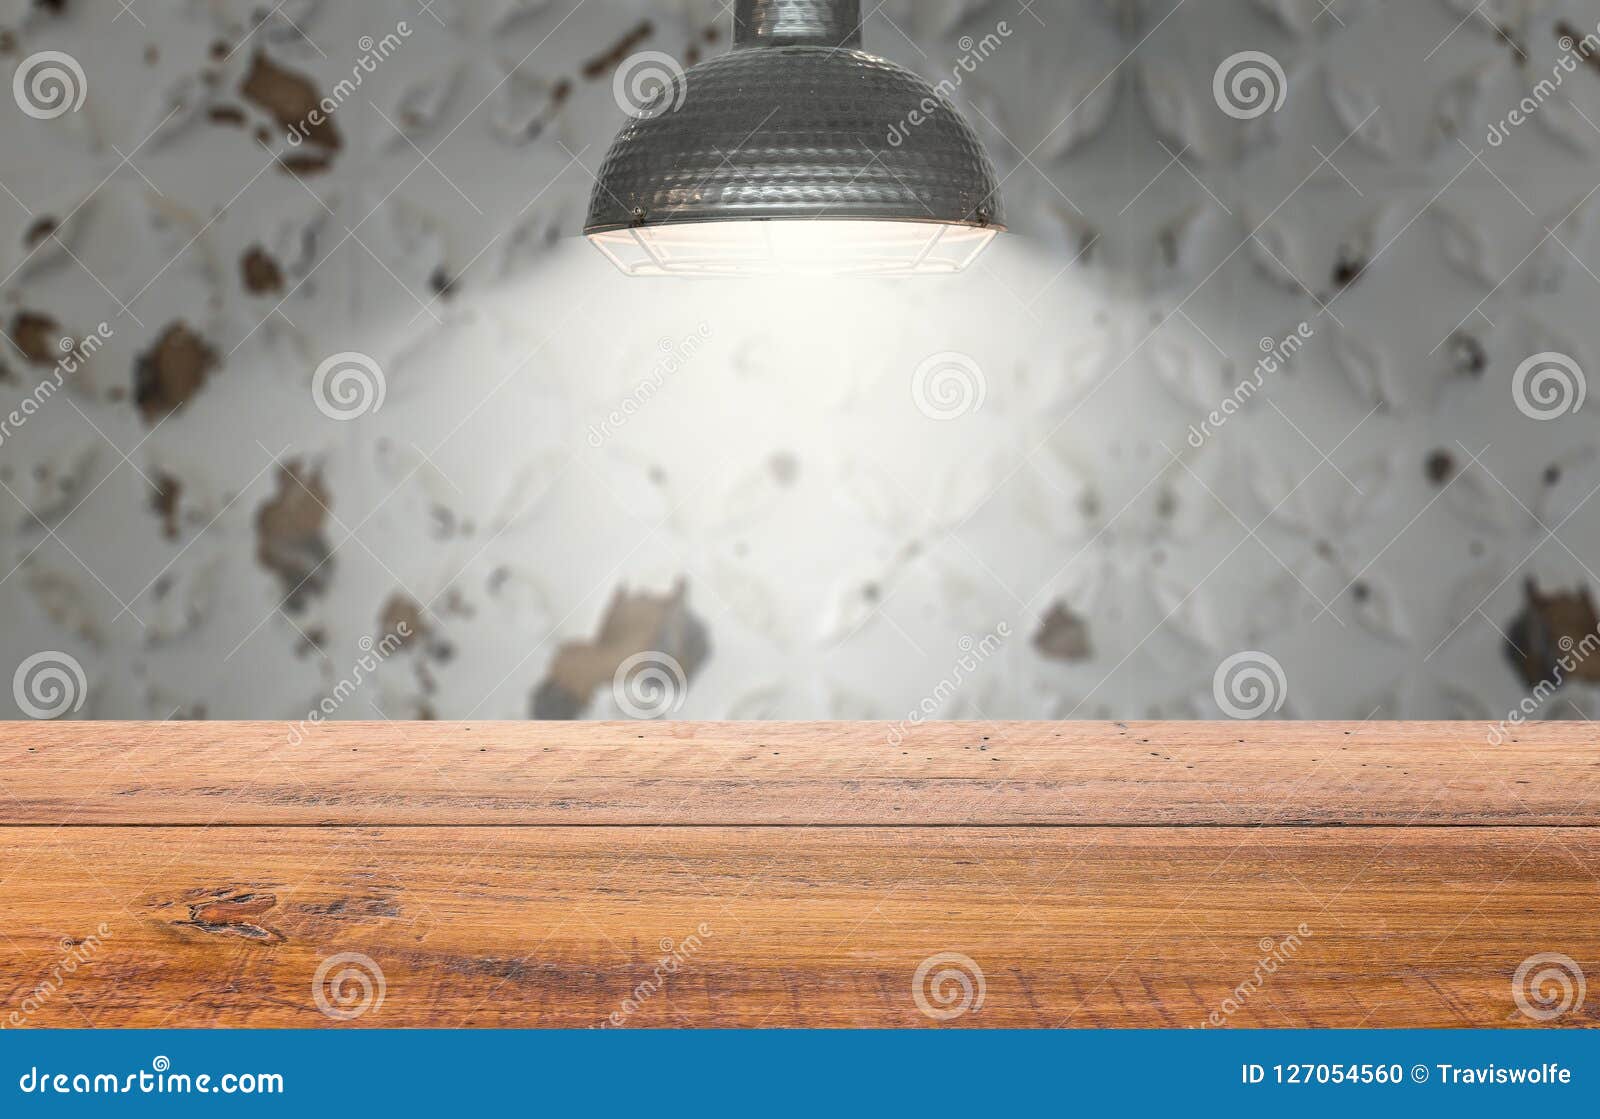 bright light interrogation team wooden table lonely room for display. hanging lamp